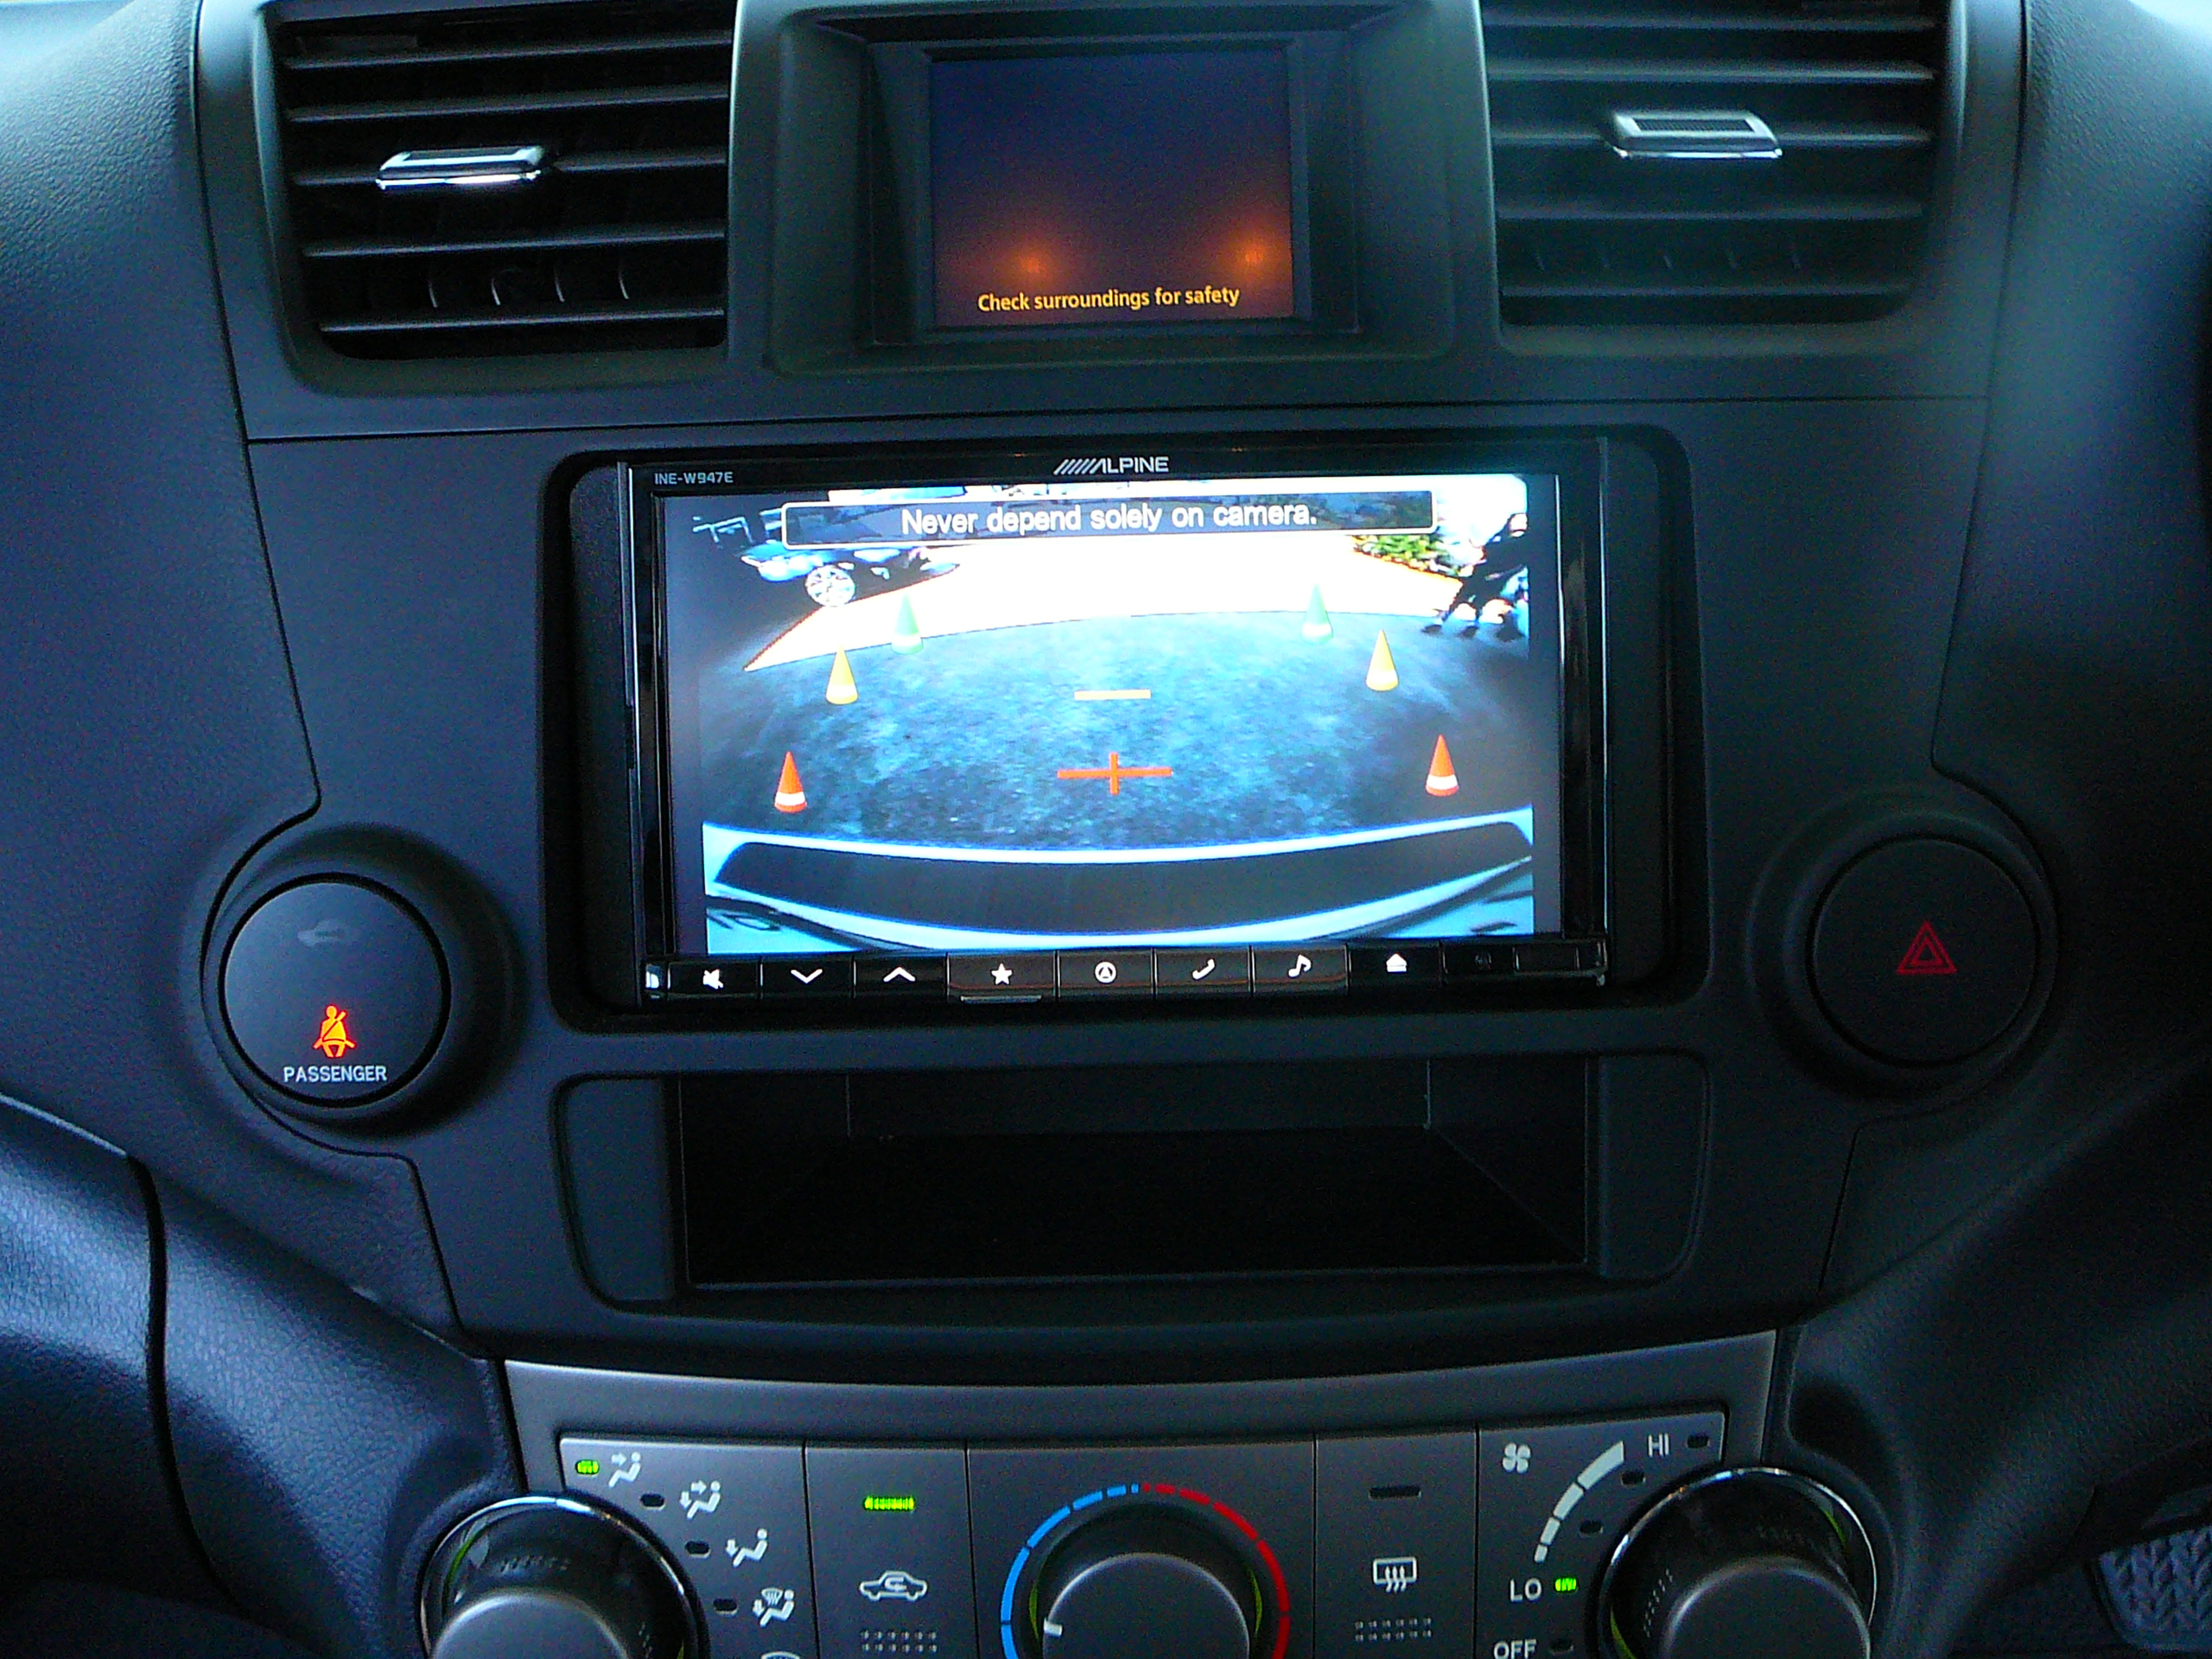 Toyota Kluger 2010, Installation of Alpine INE-W947 Navigation System and Reverse Camera